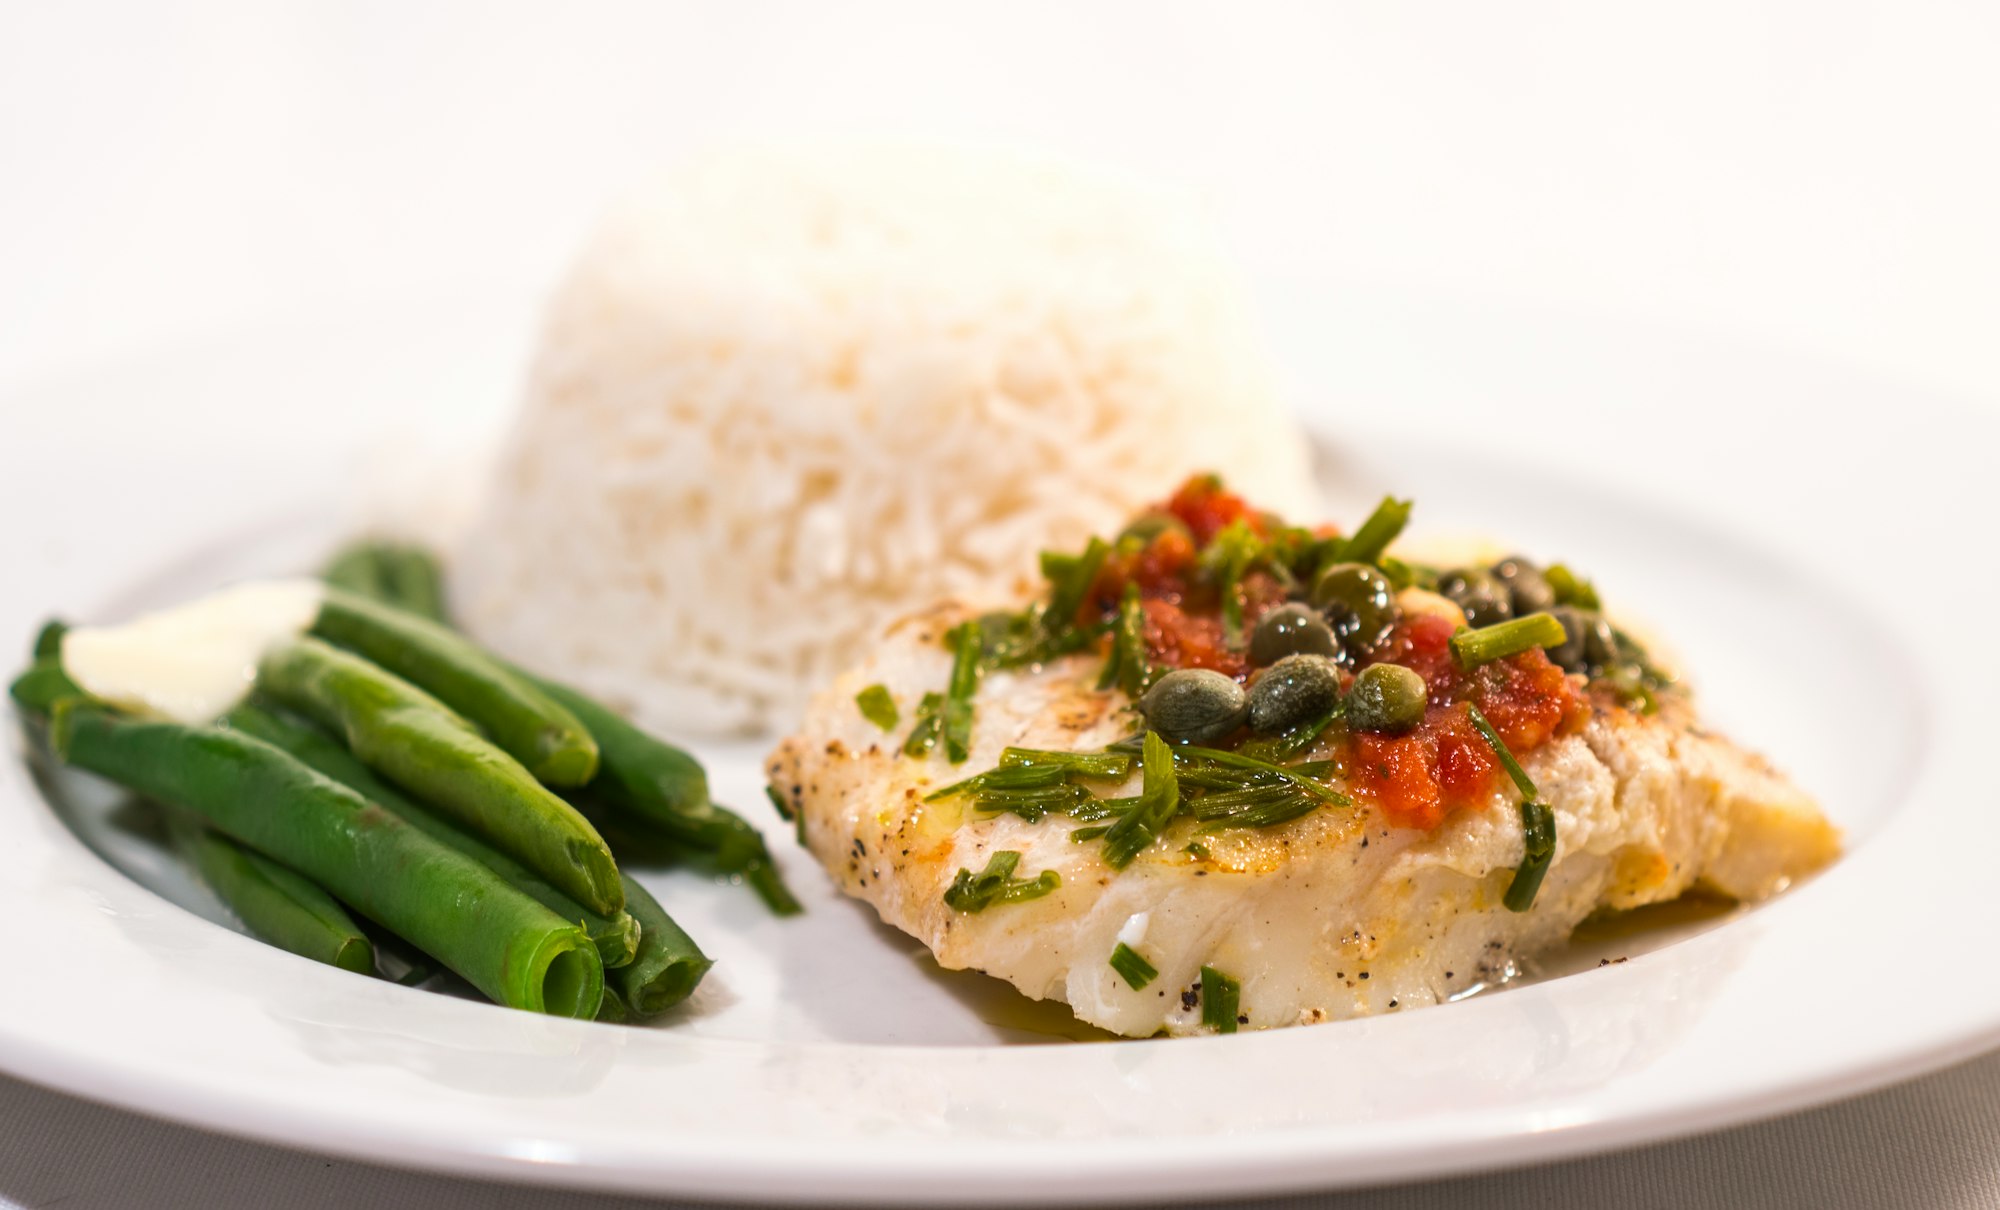 SAUTEED COD WITH CAPERS AND TOMATO